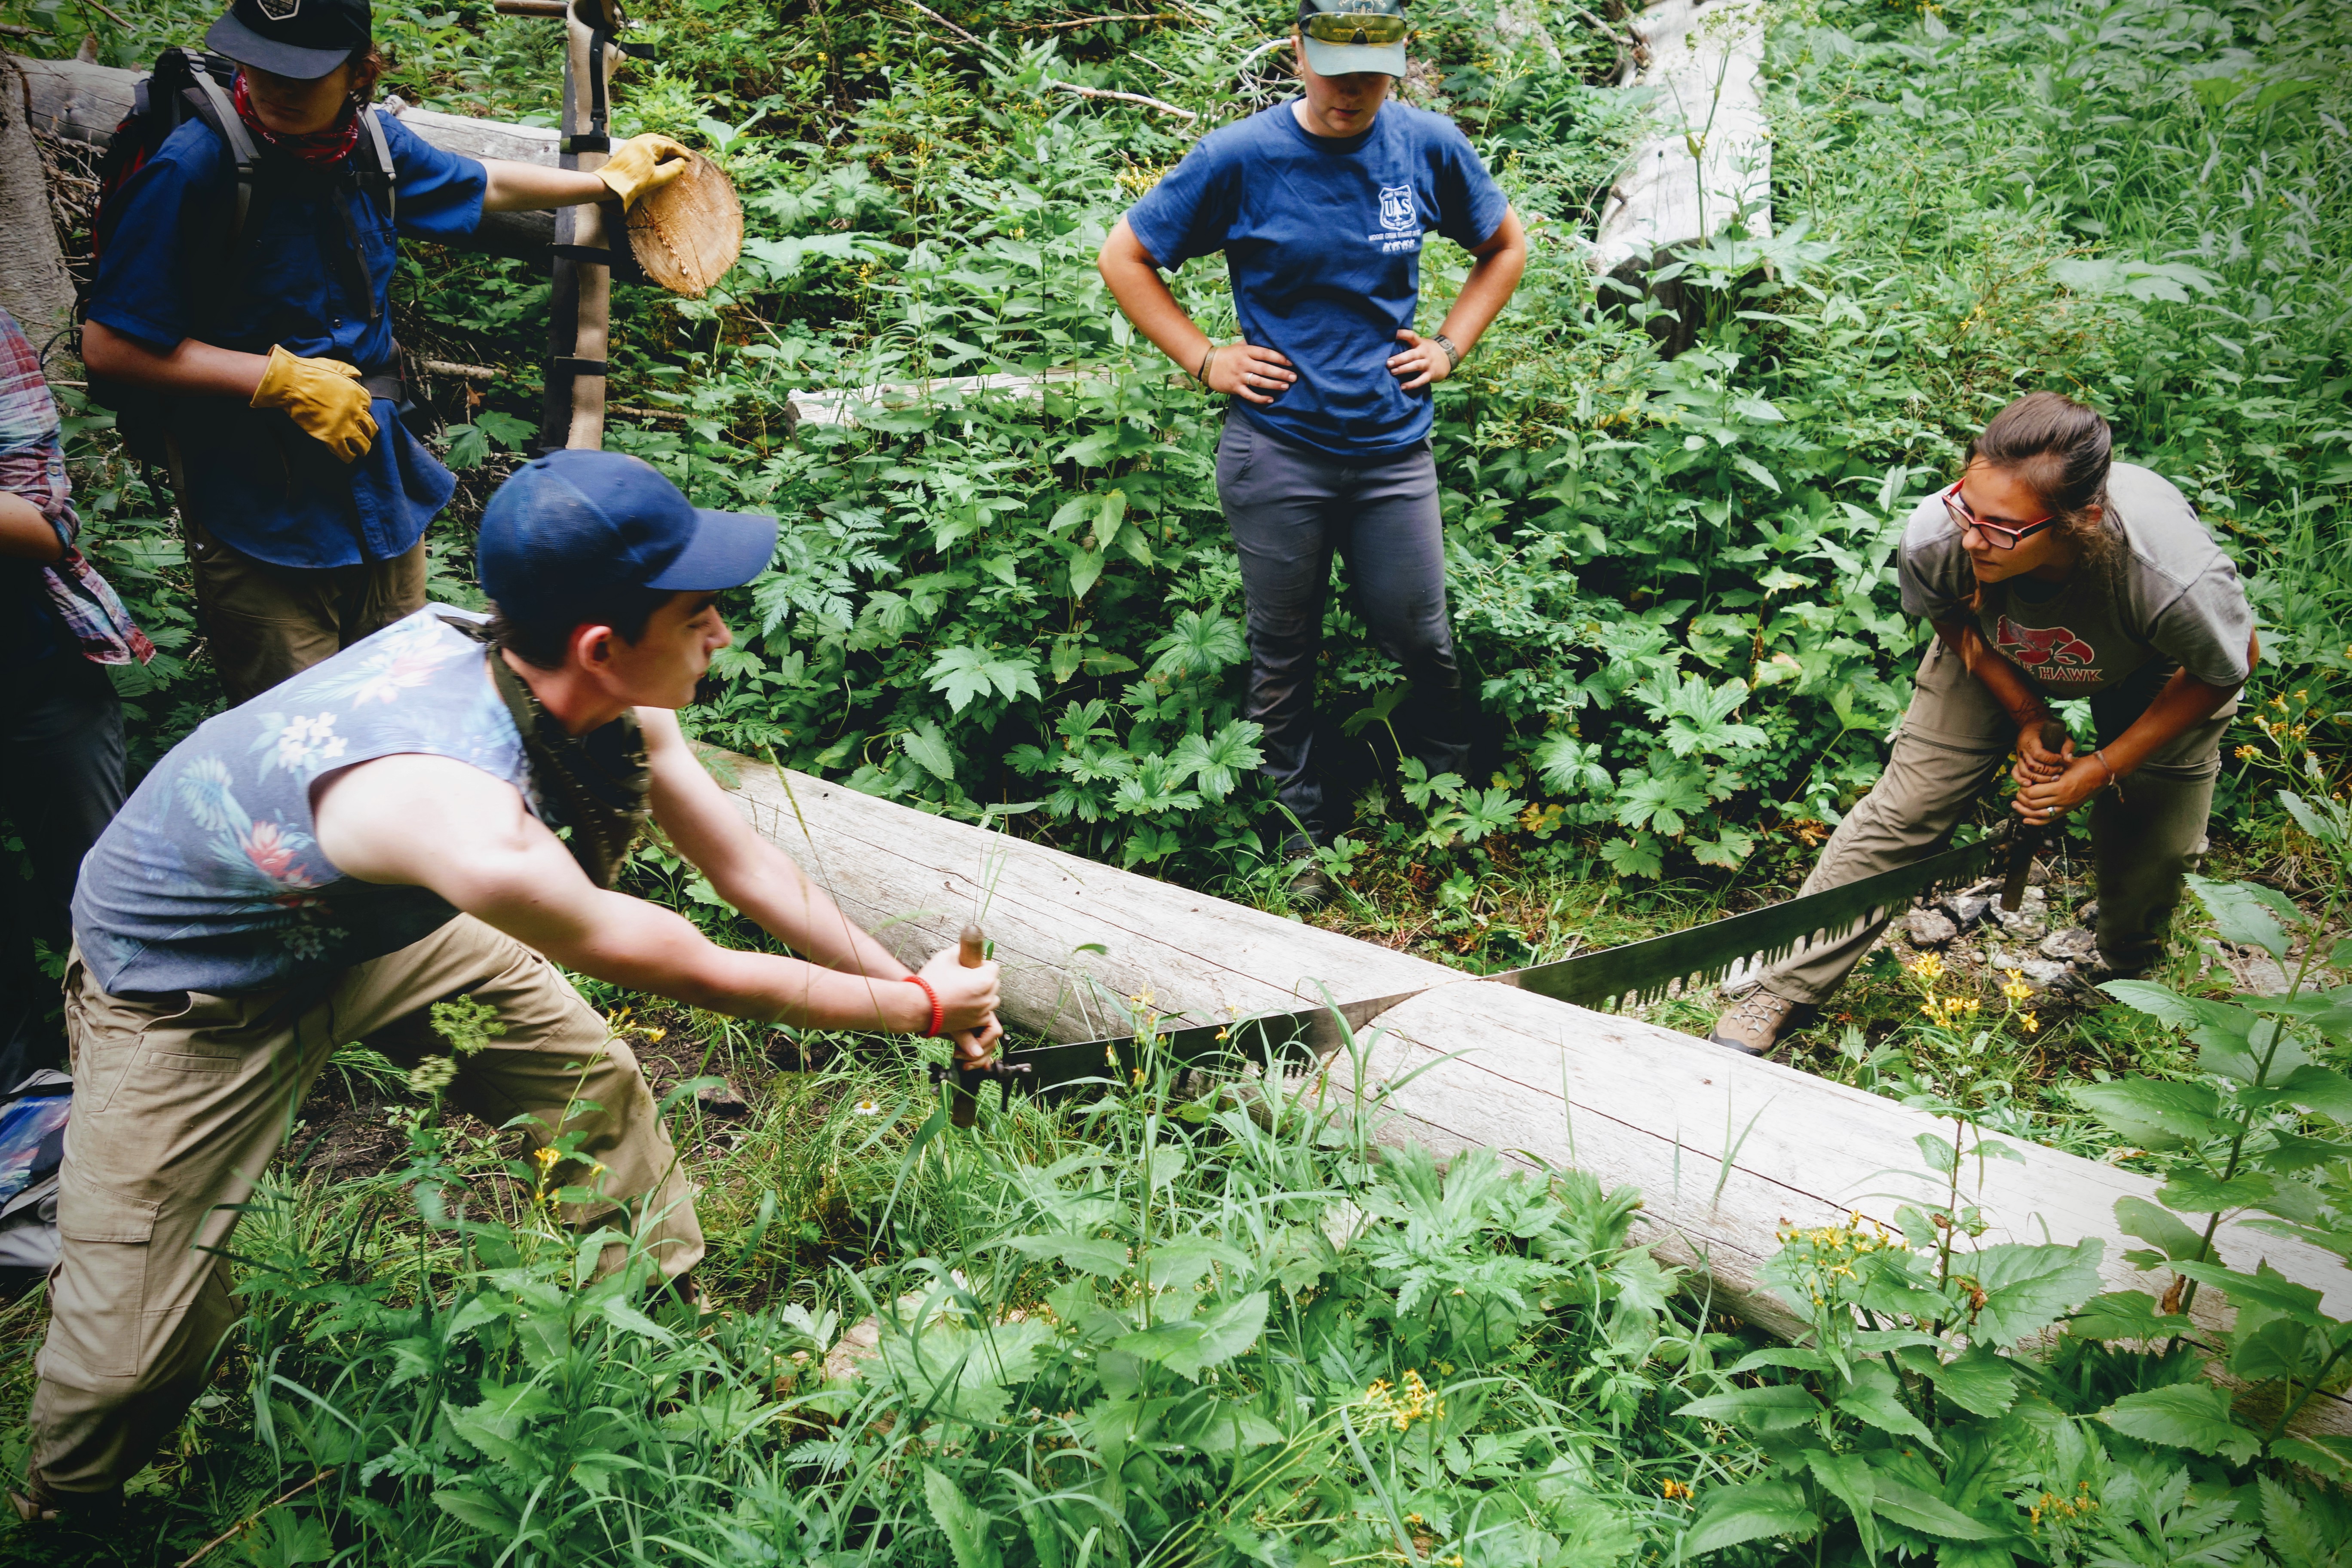 Two people operate a crosscut to cut through a two-foot-diameter log that is blocking a trail.